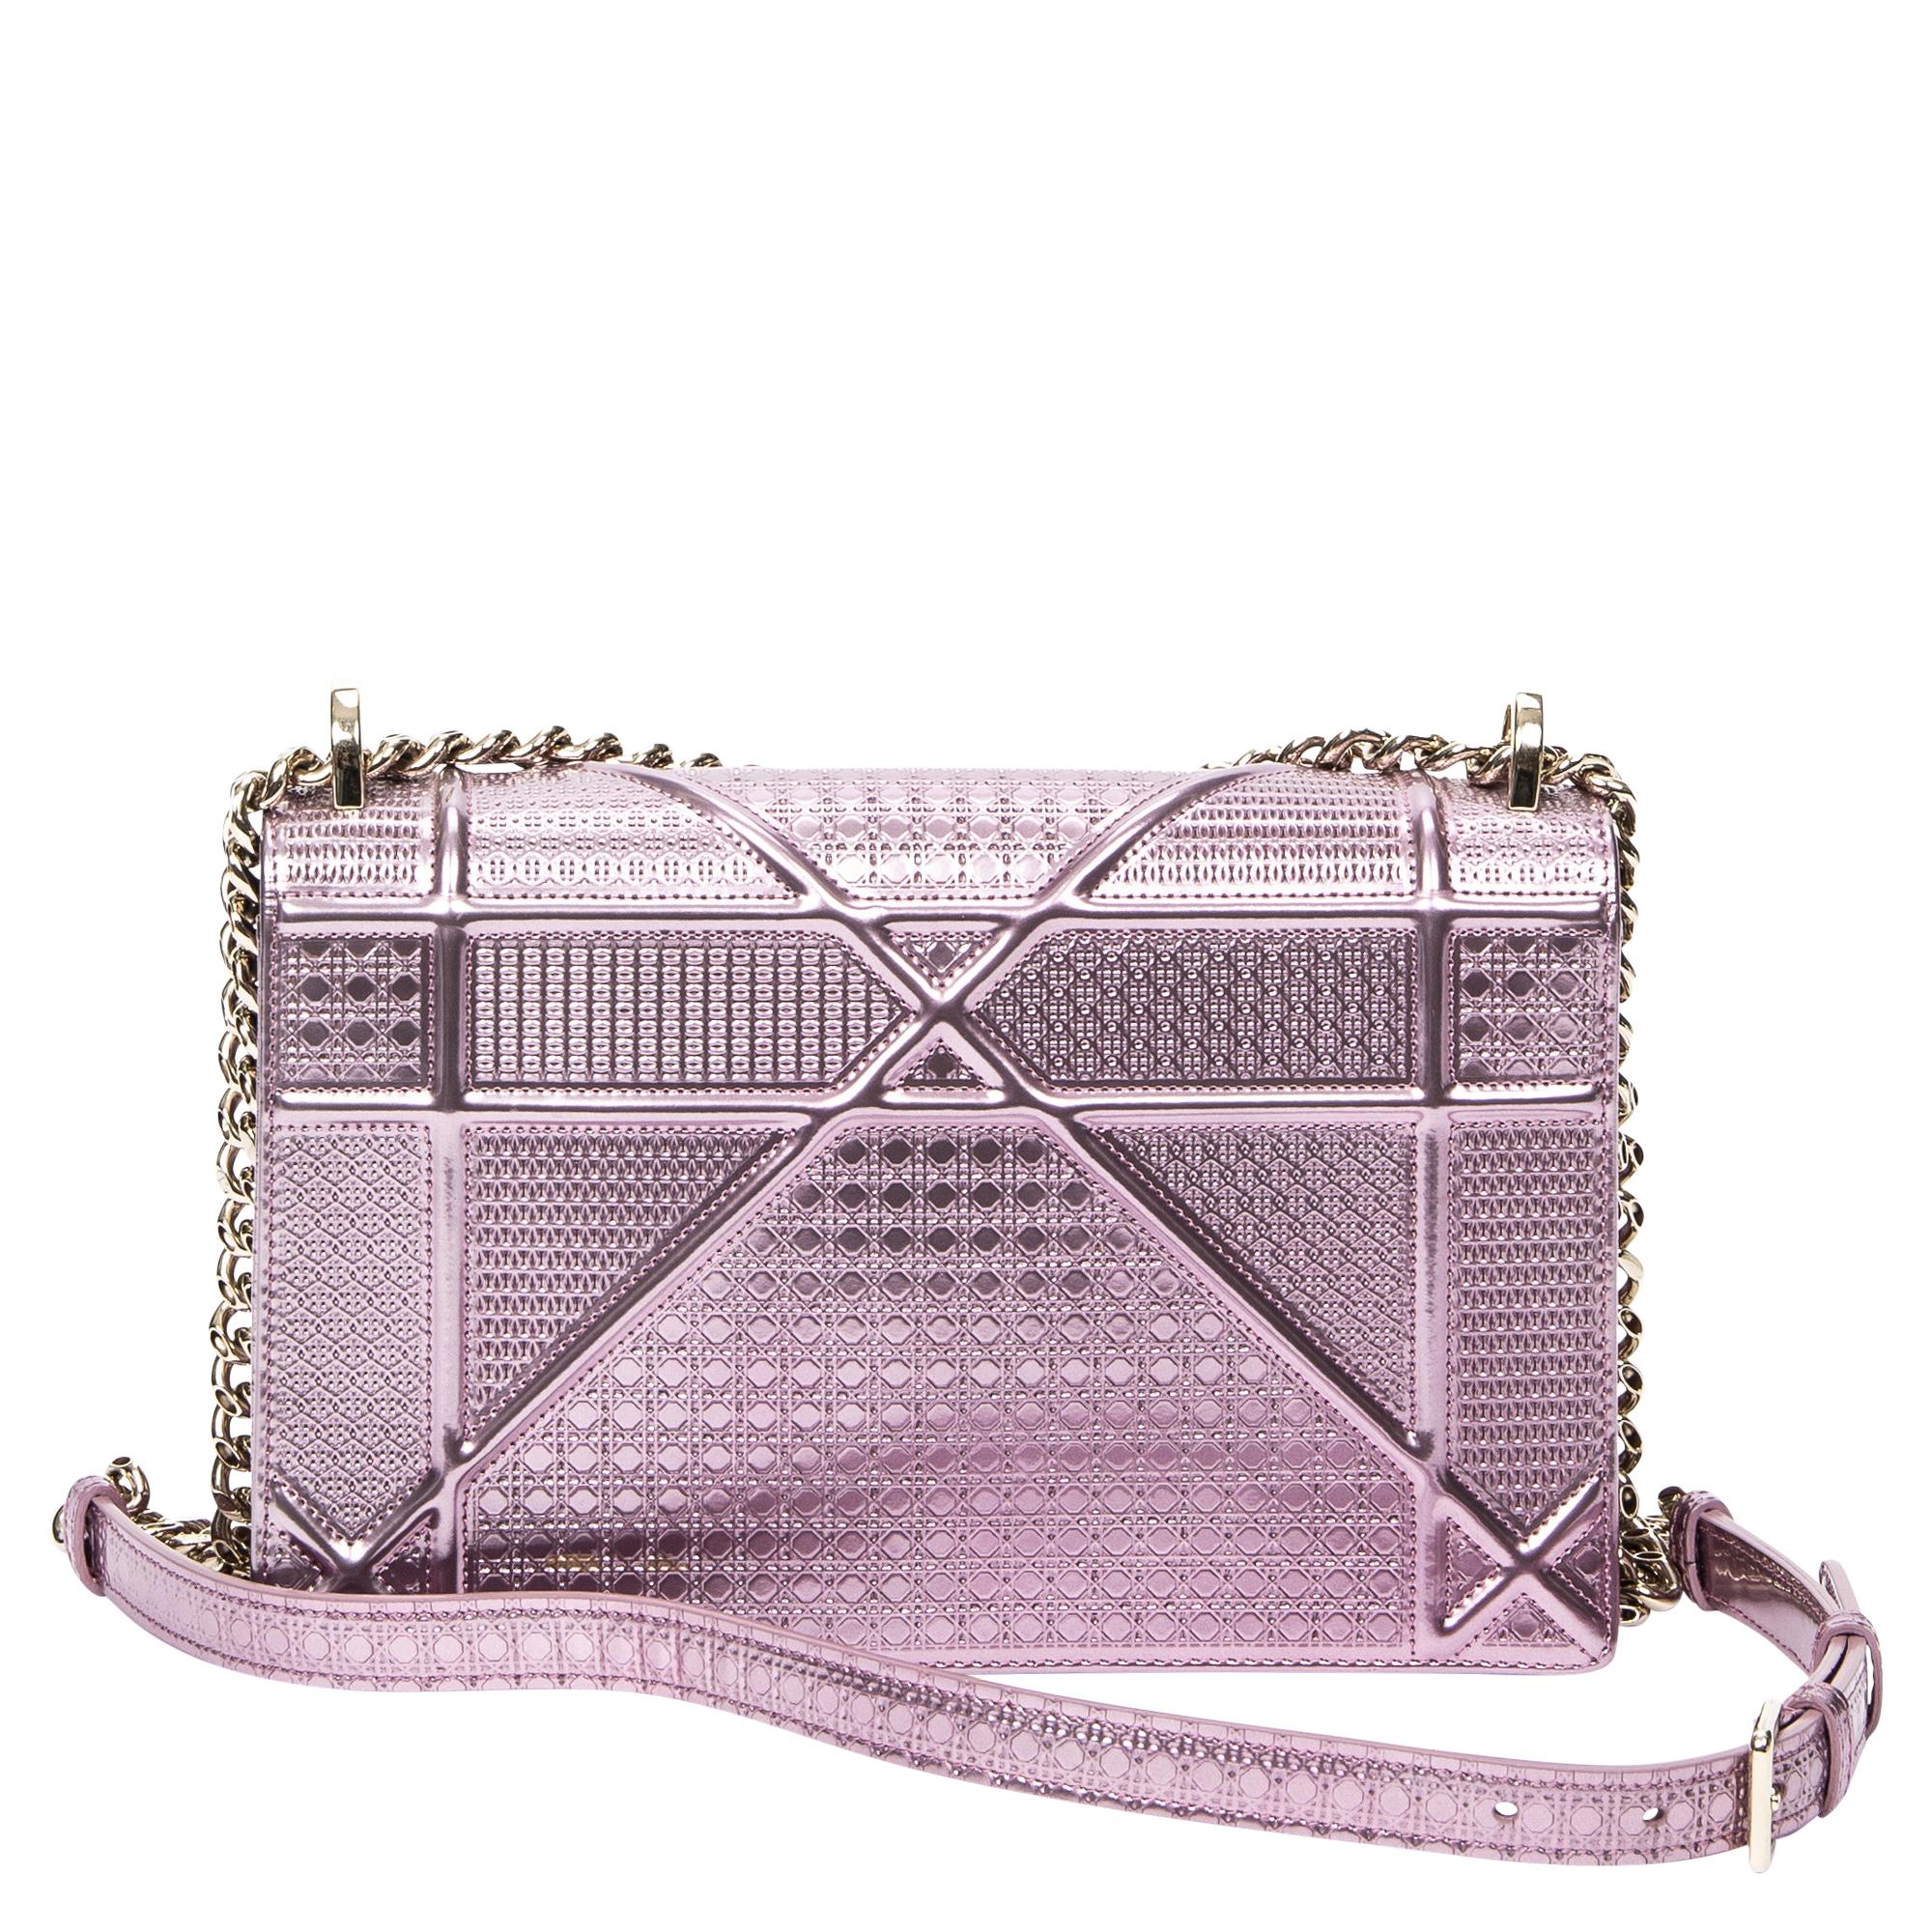 Dior 2018 Metallic Pink Cannage Crossbody Bag In Excellent Condition For Sale In Atlanta, GA